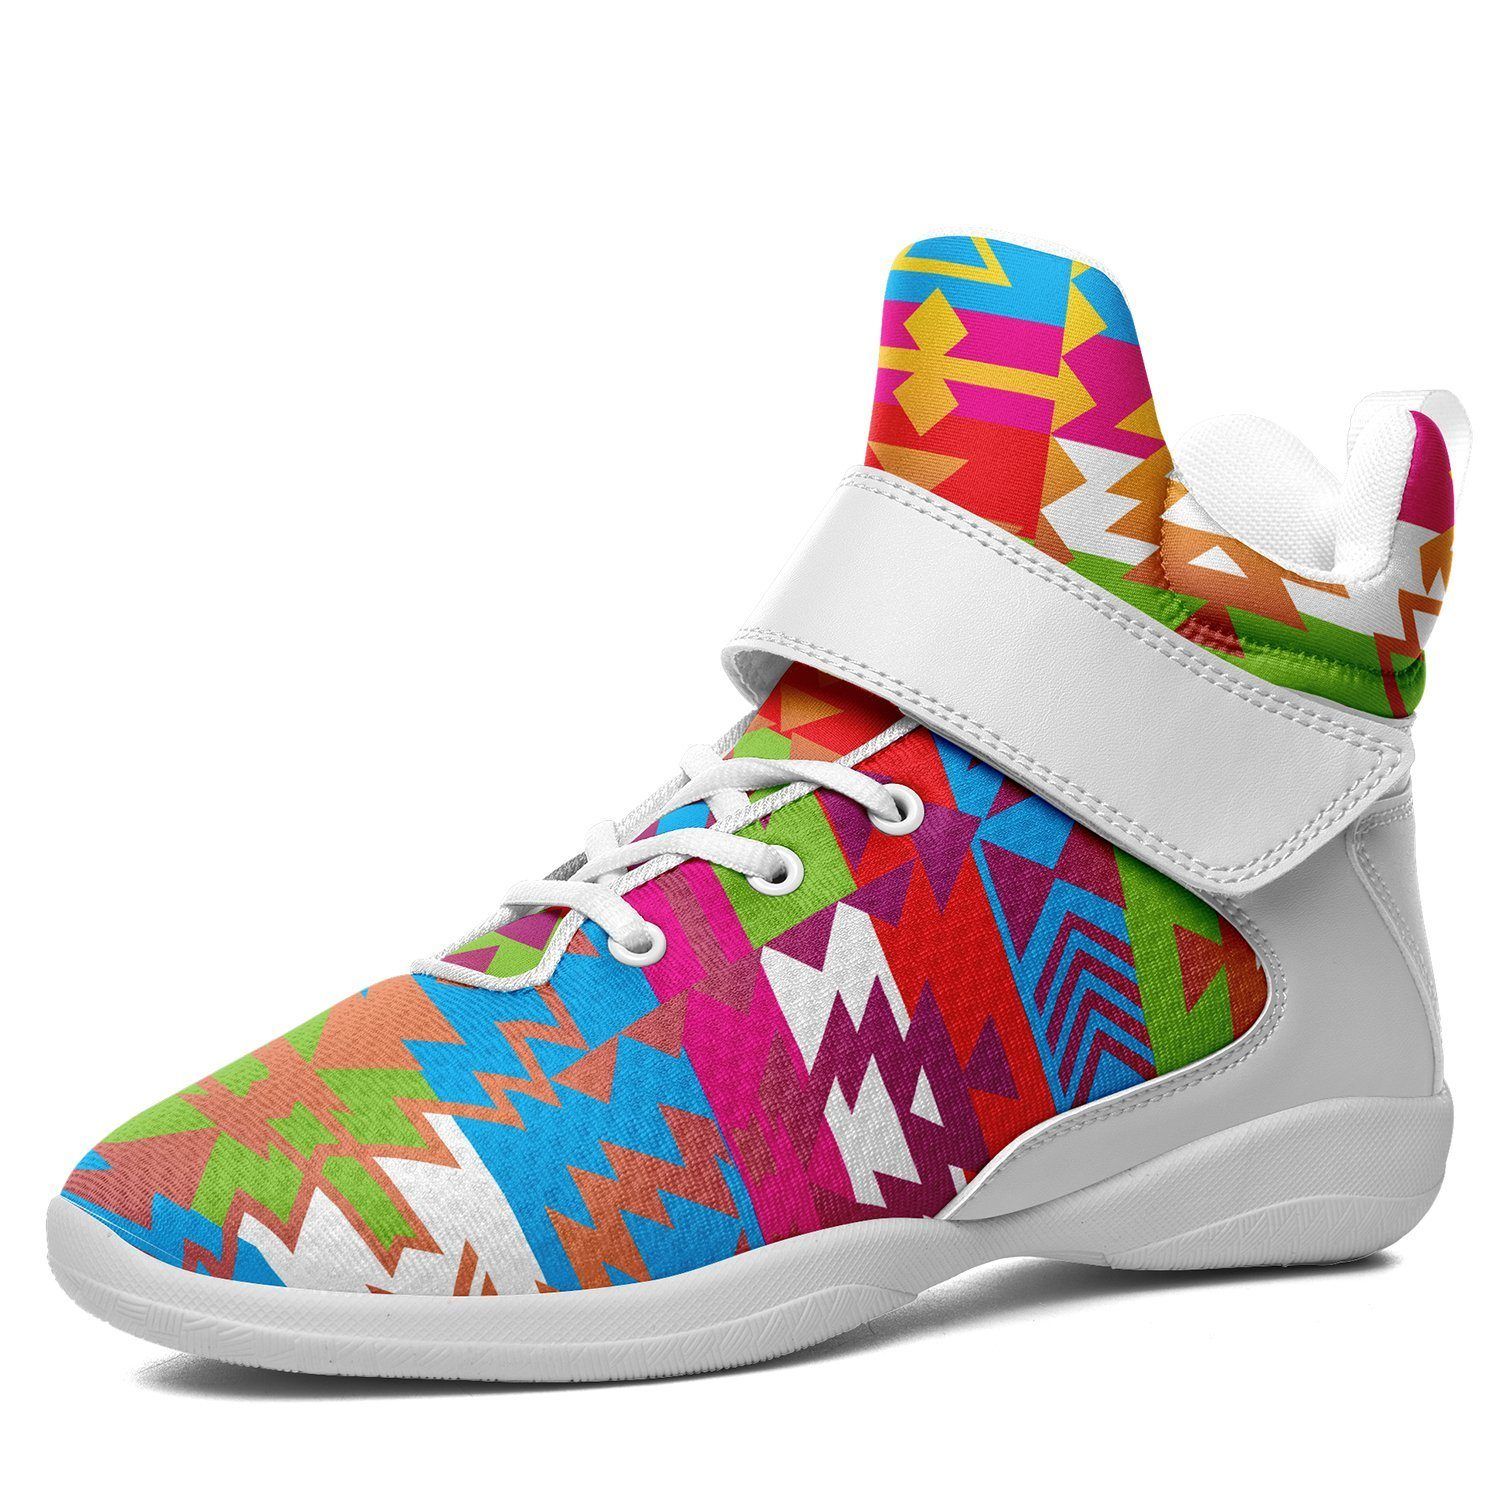 Grand Entry Ipottaa Basketball / Sport High Top Shoes - White Sole 49 Dzine US Men 7 / EUR 40 White Sole with White Strap 